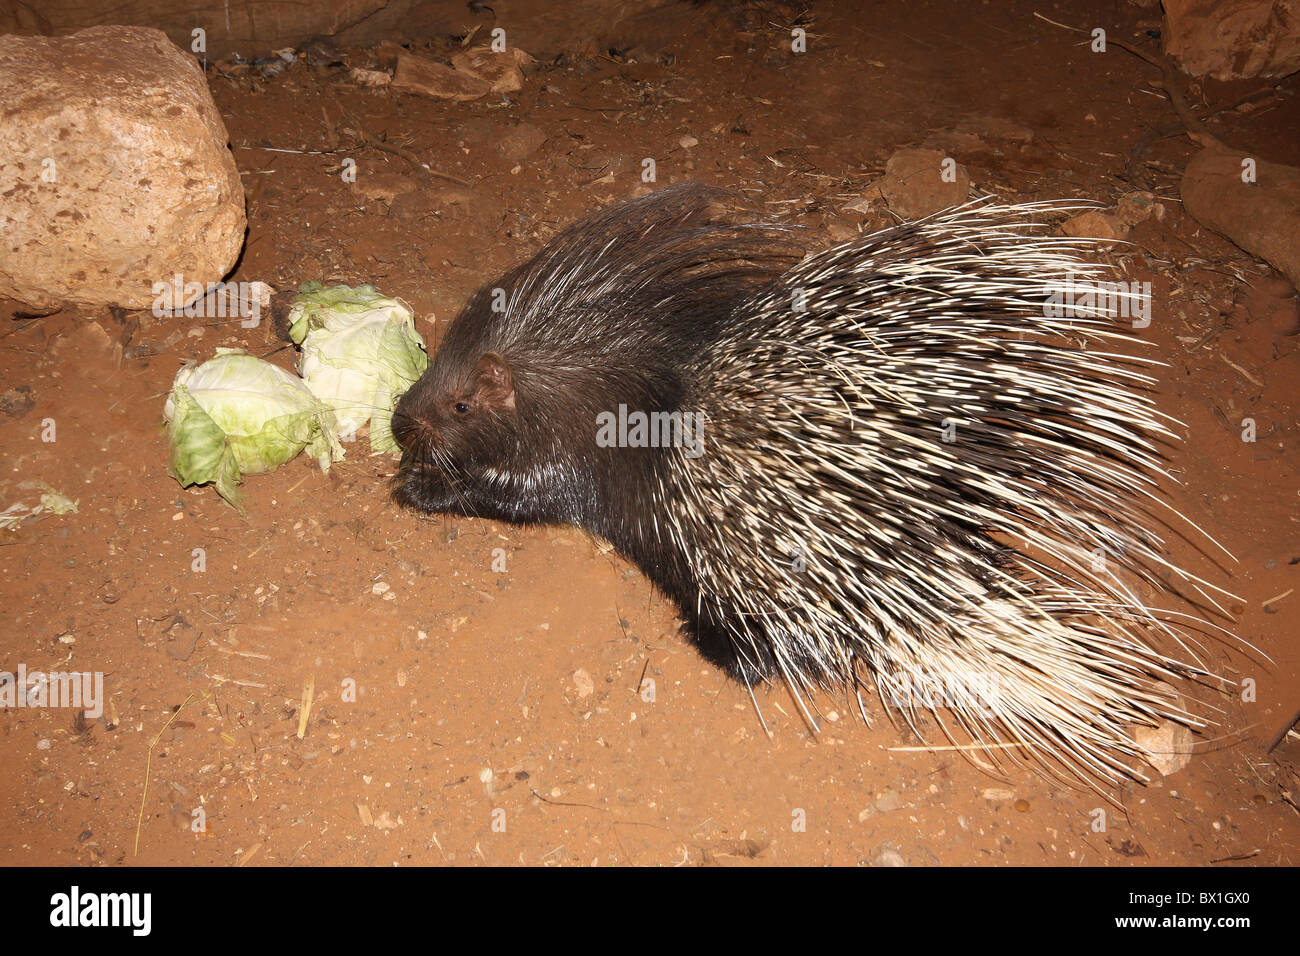 Yong Indian Crested Porcupine (Hystrix indica), Stock Photo